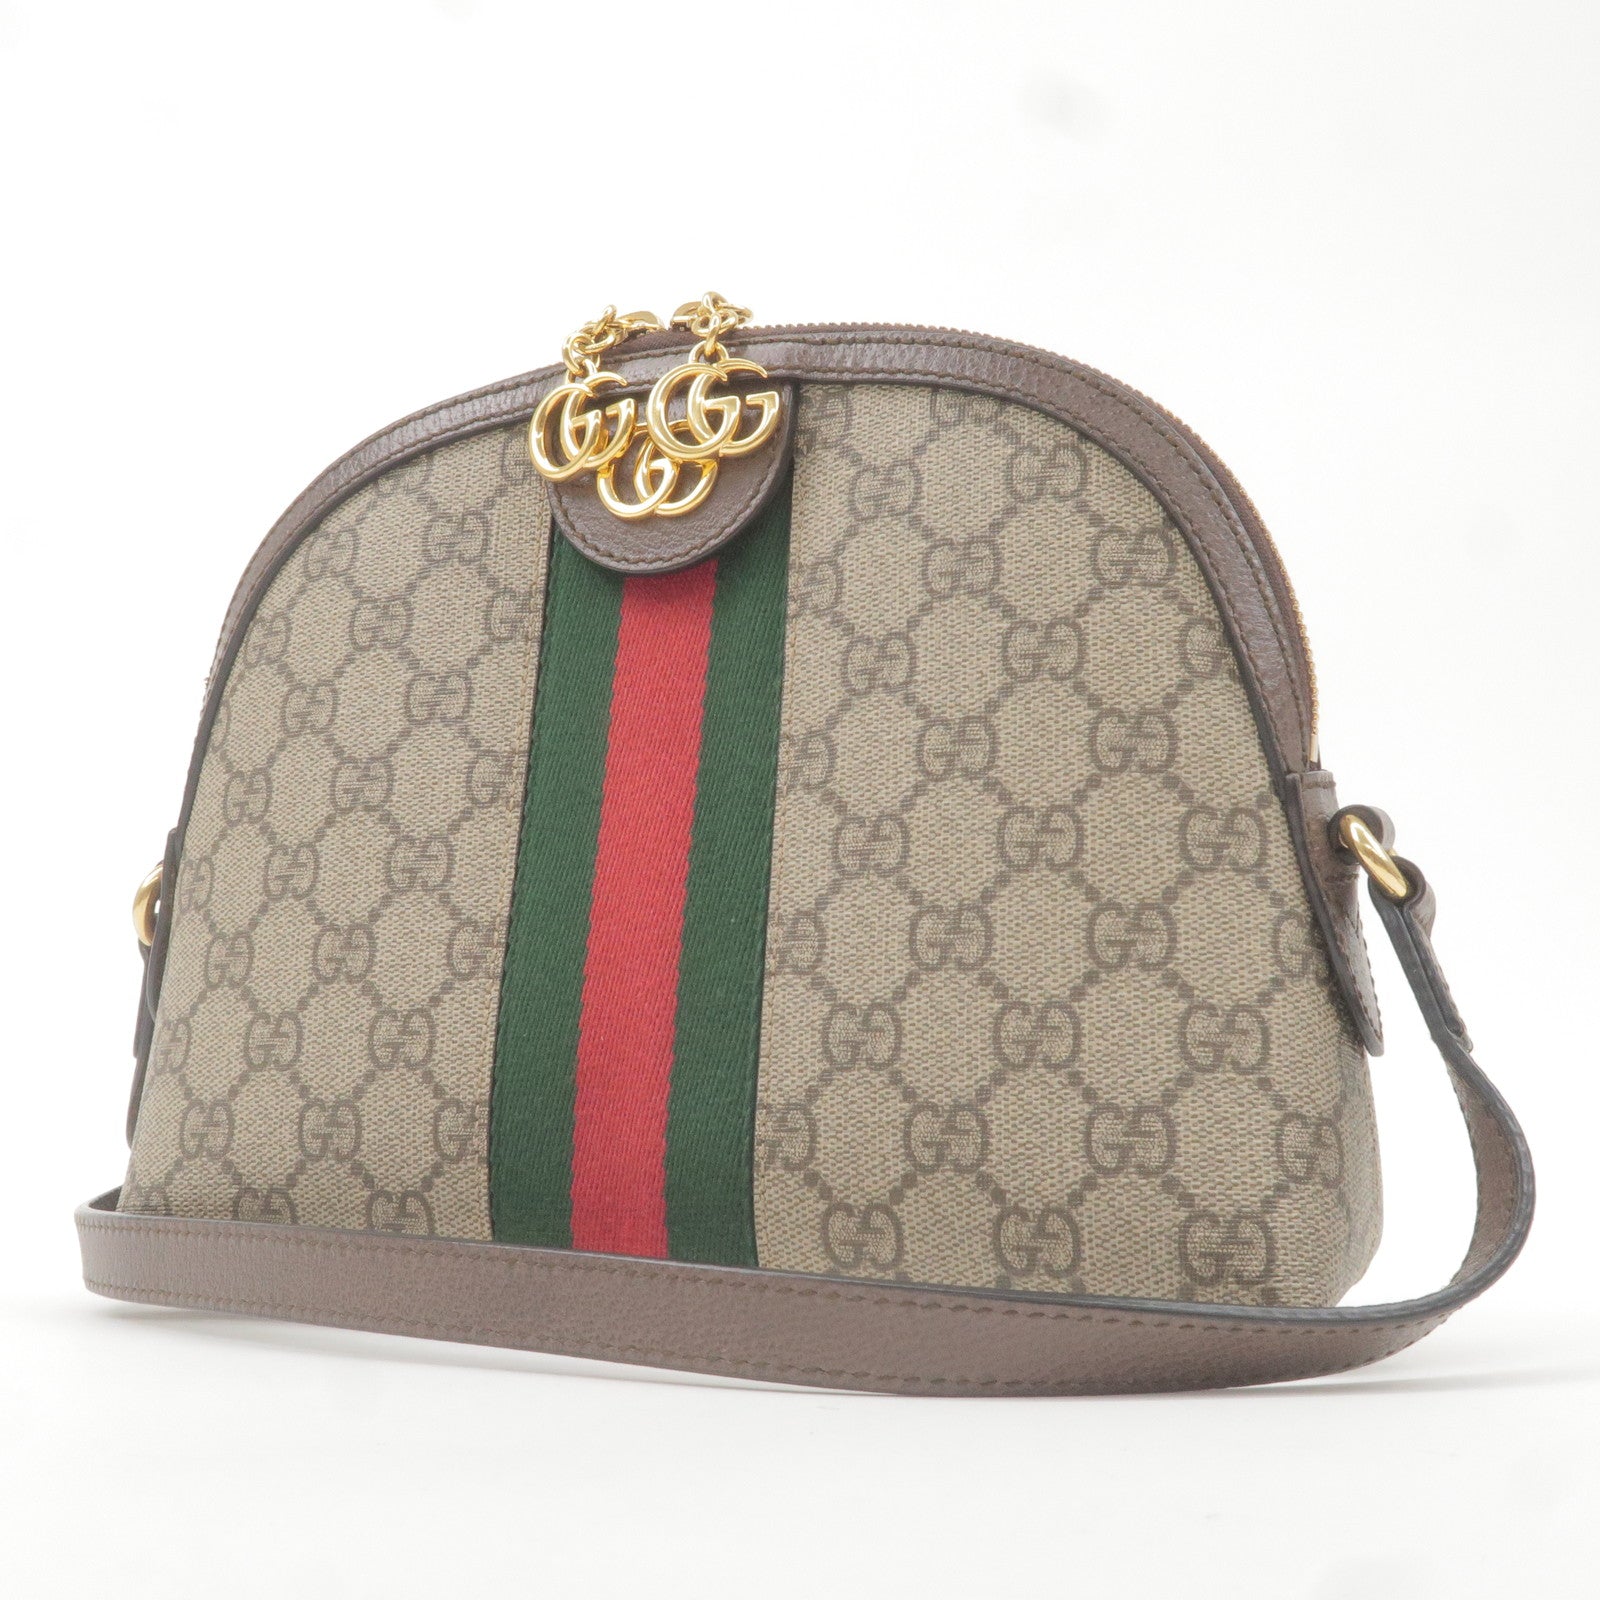 Gucci Beige/Brown GG Supreme Canvas and Leather Ophidia Shoulder Bag Gucci